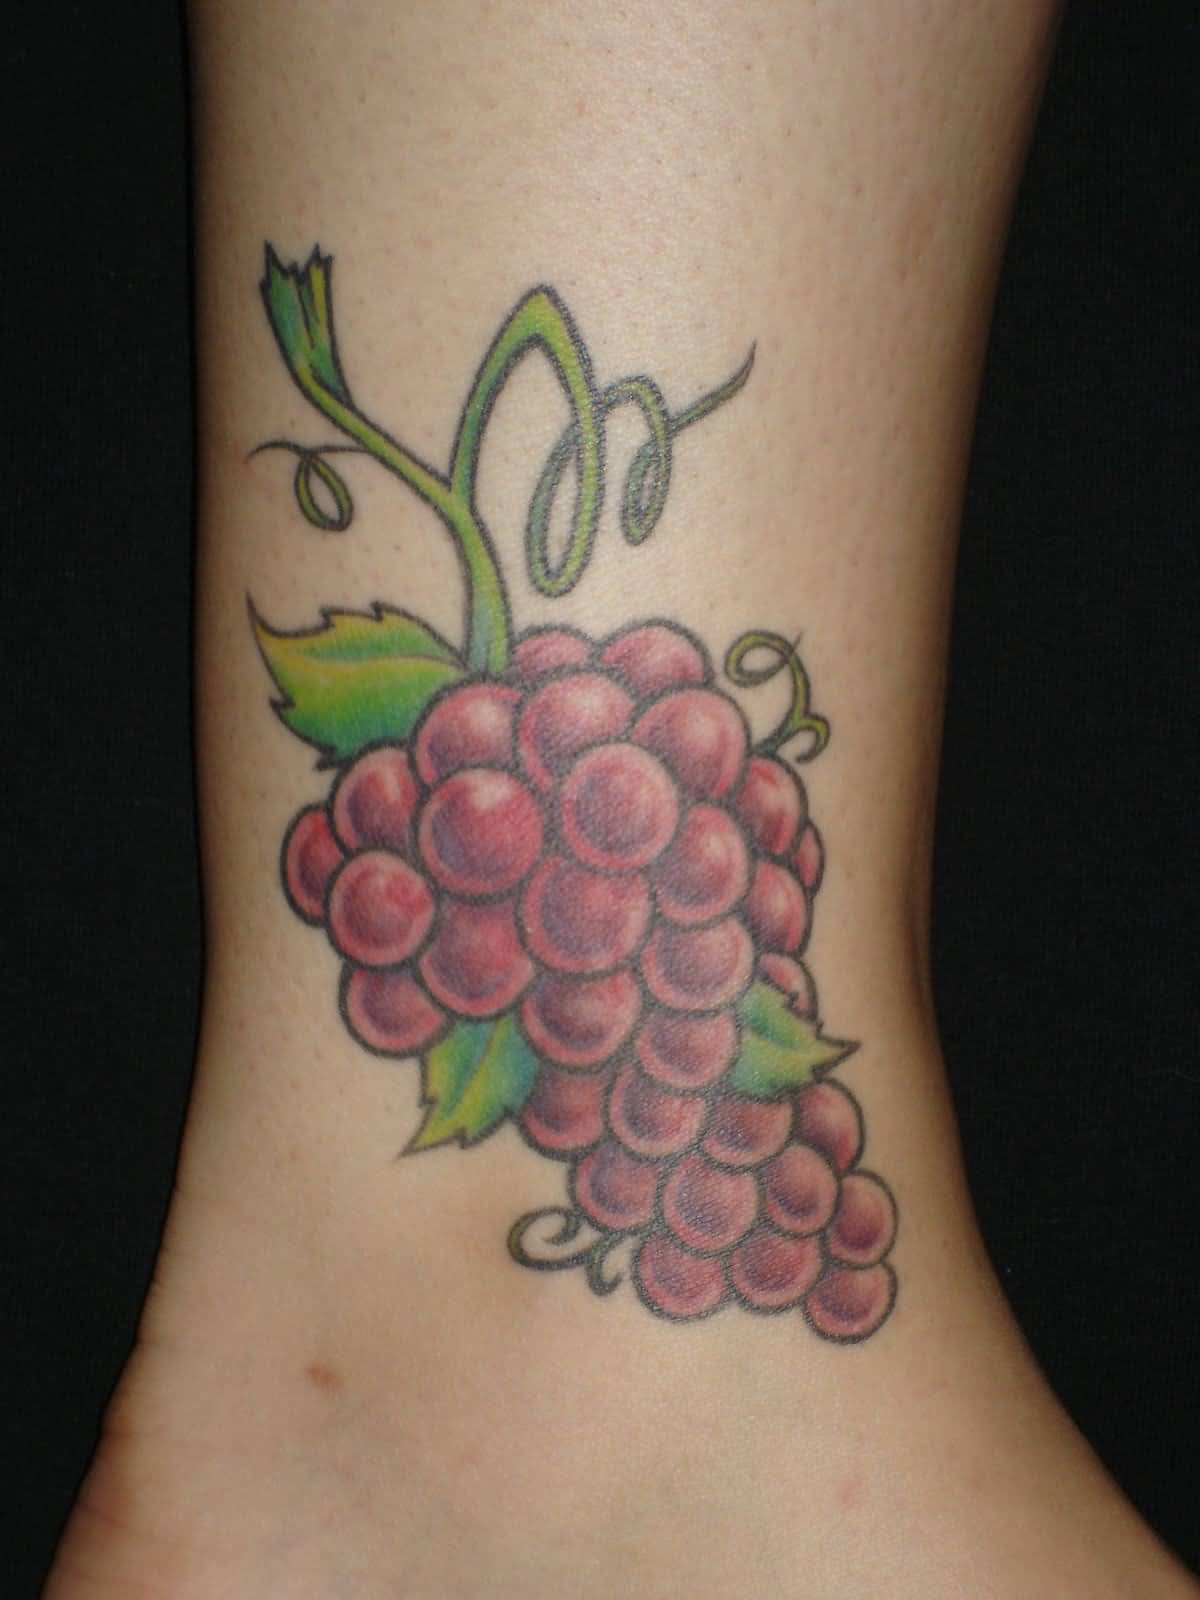 Cool Grapes Tattoo Design For Ankle